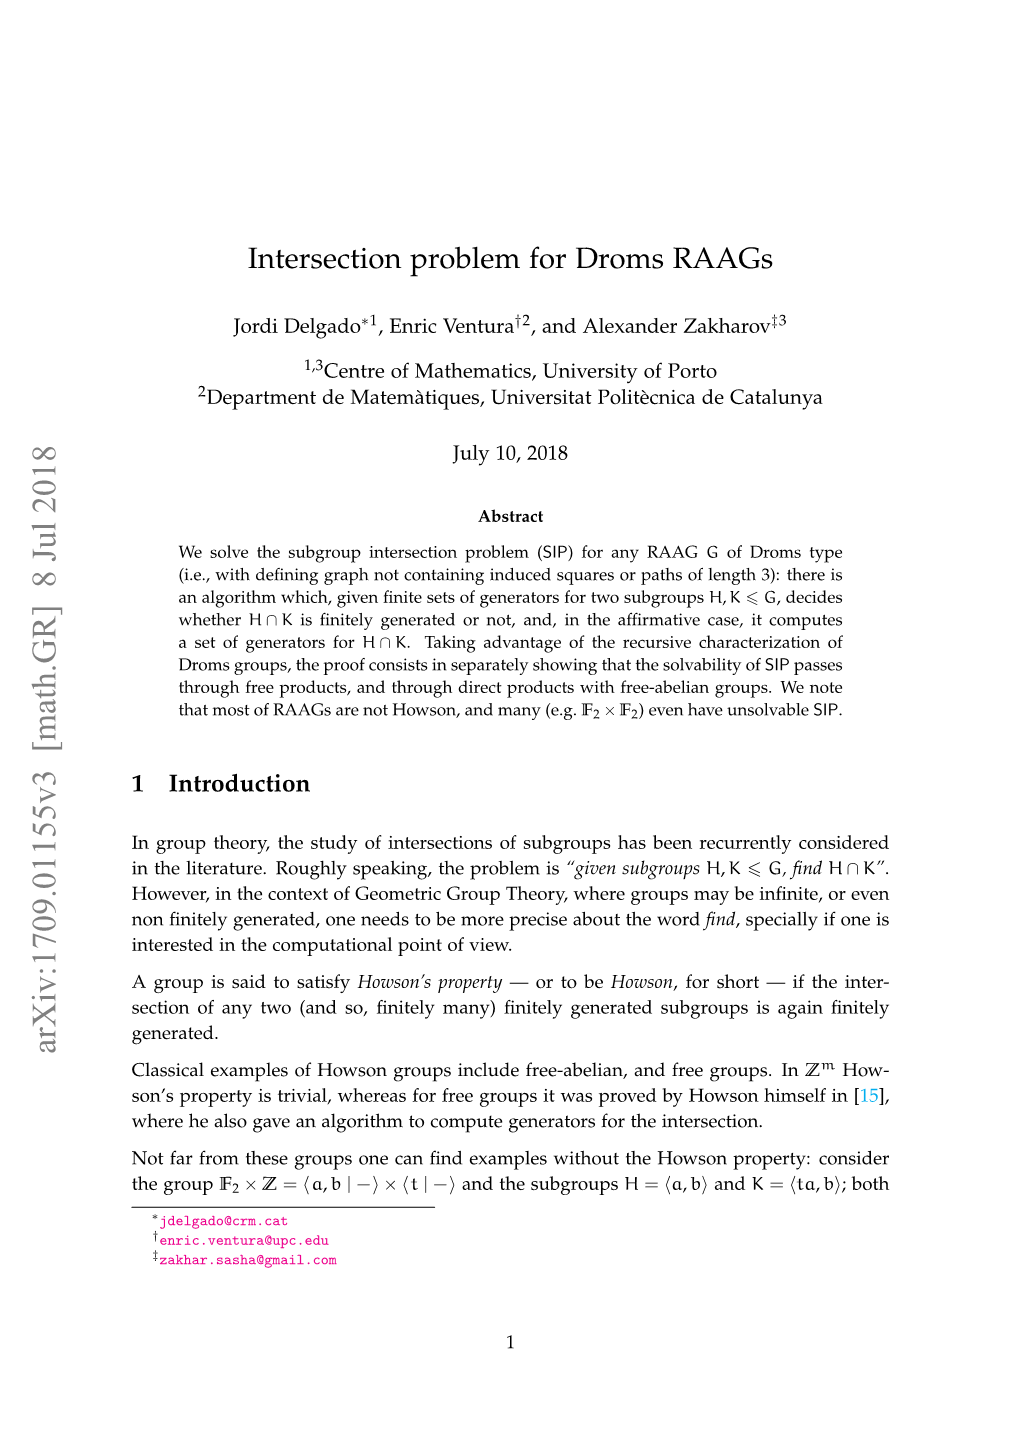 Intersection Problem for Droms Raags